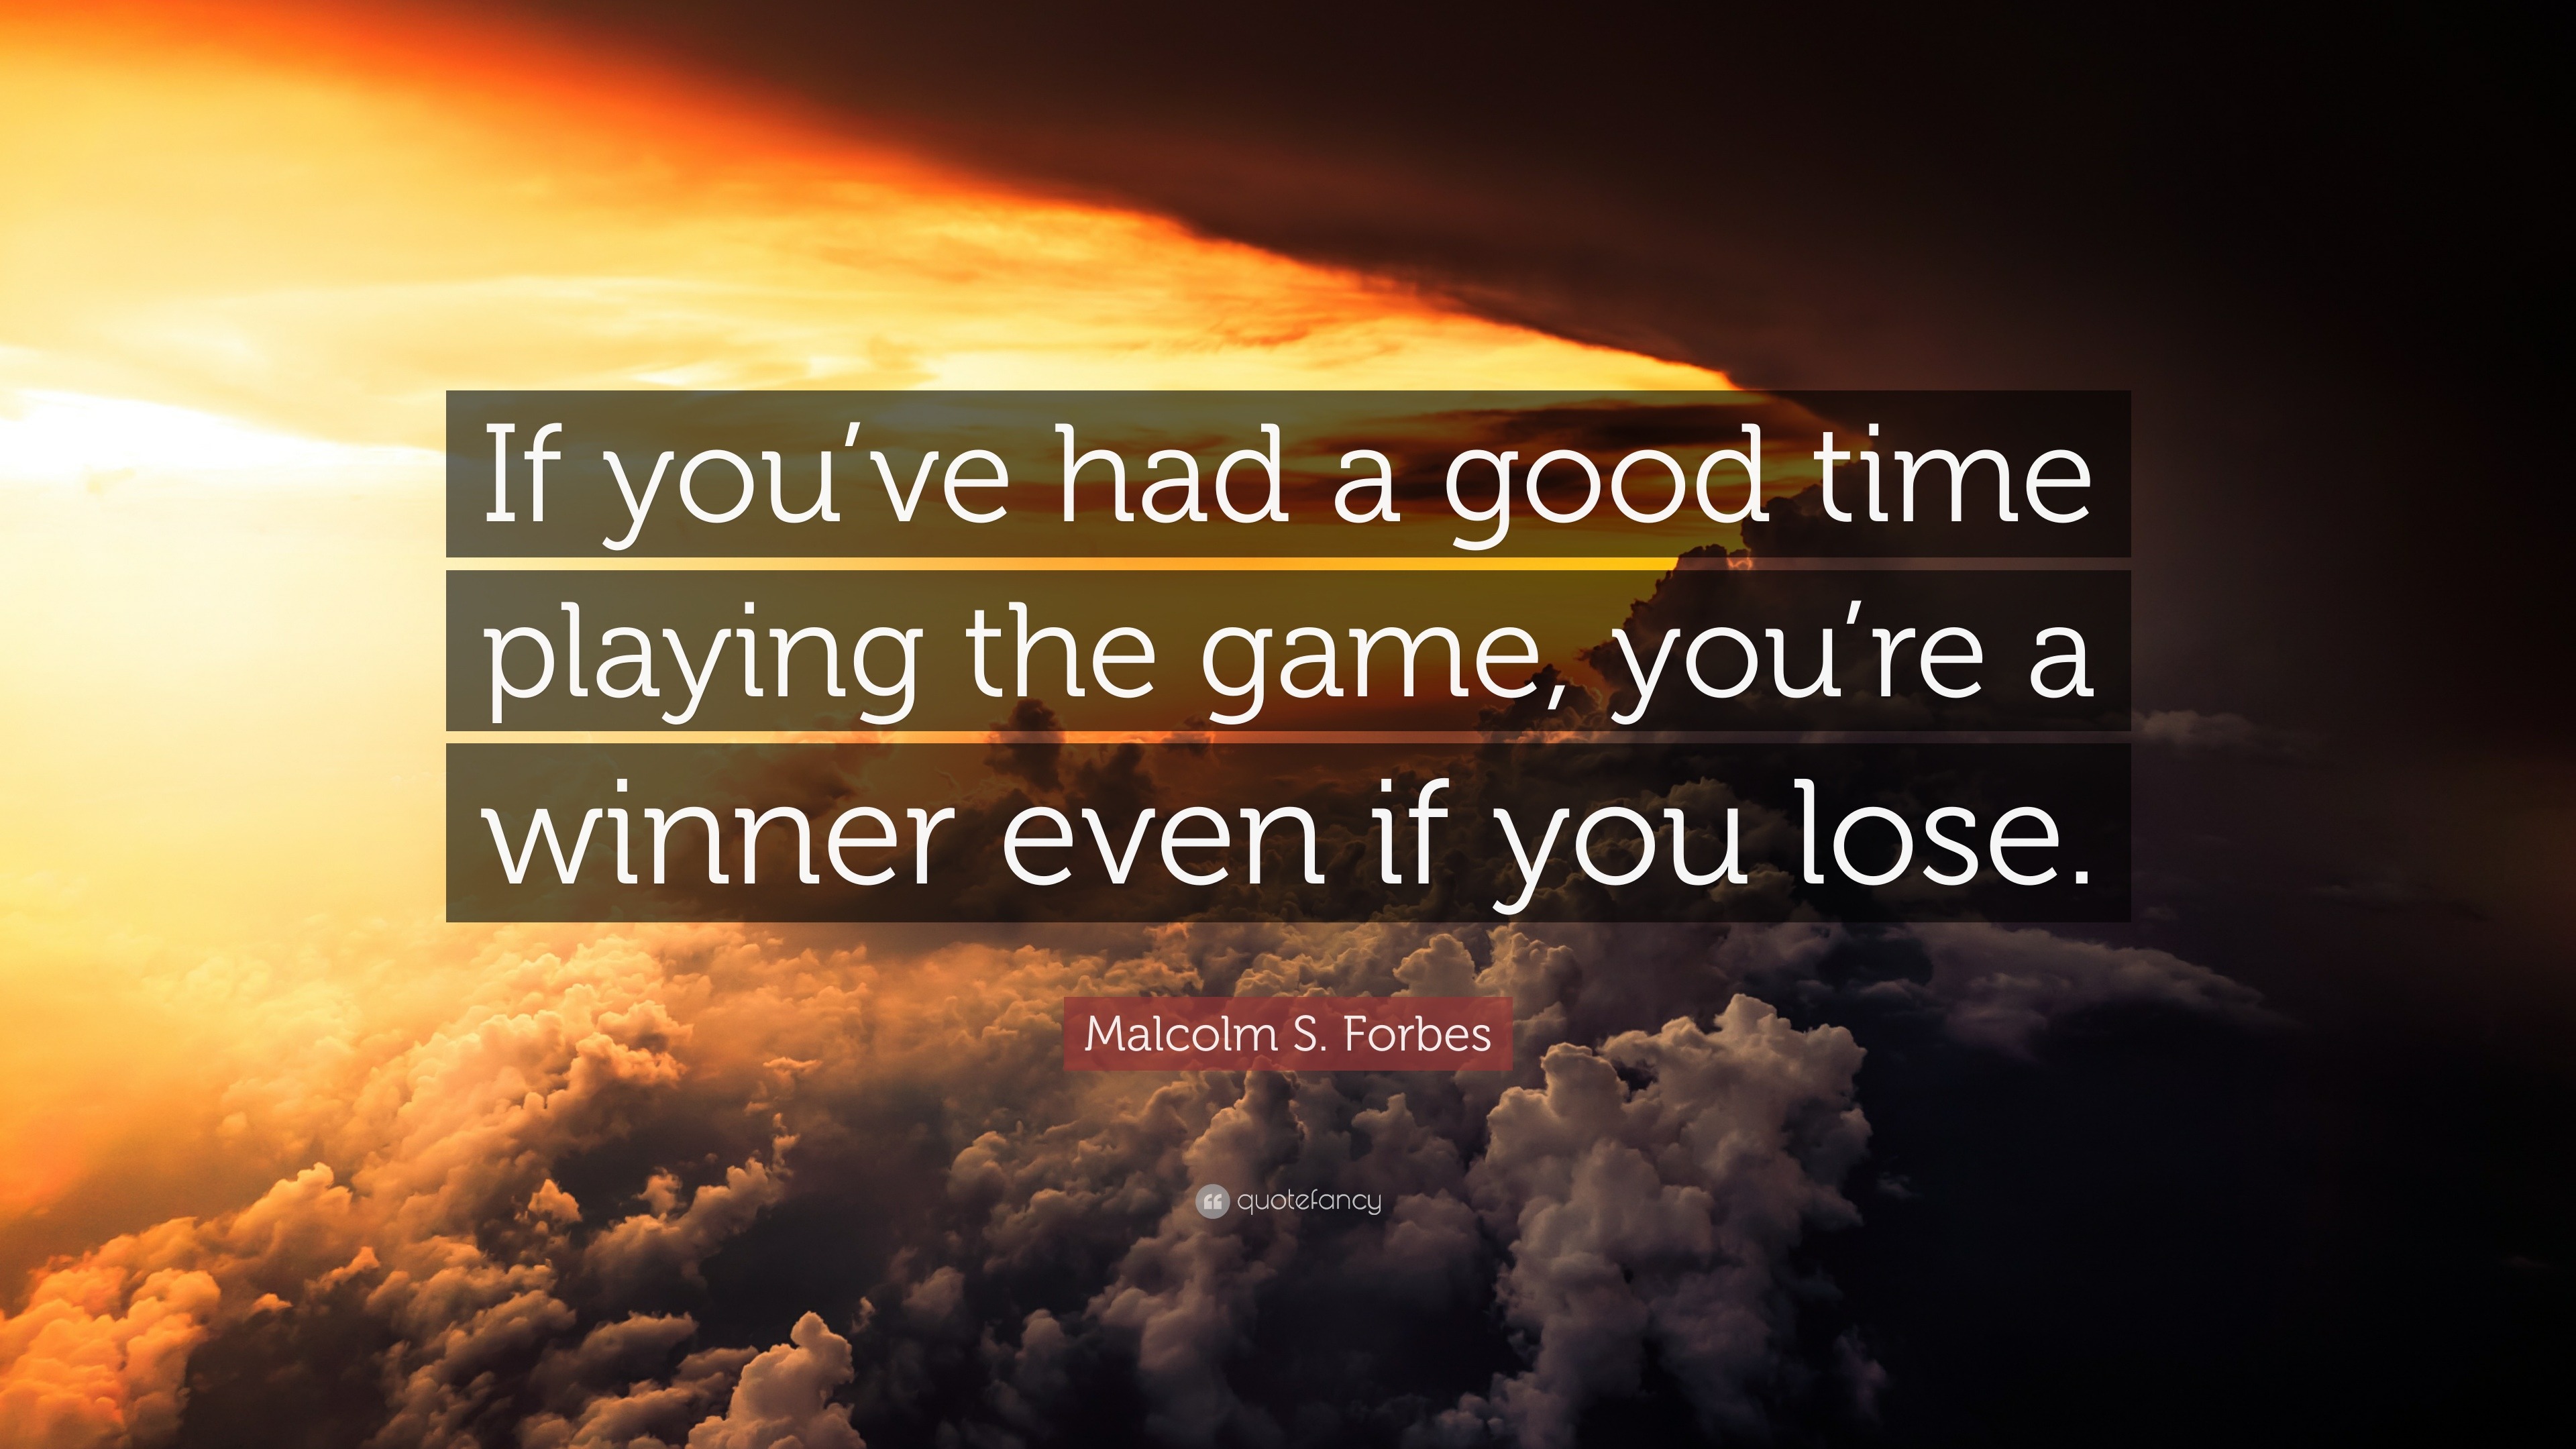 Malcolm S. Forbes Quote: “If you've had a good time playing the game, you're